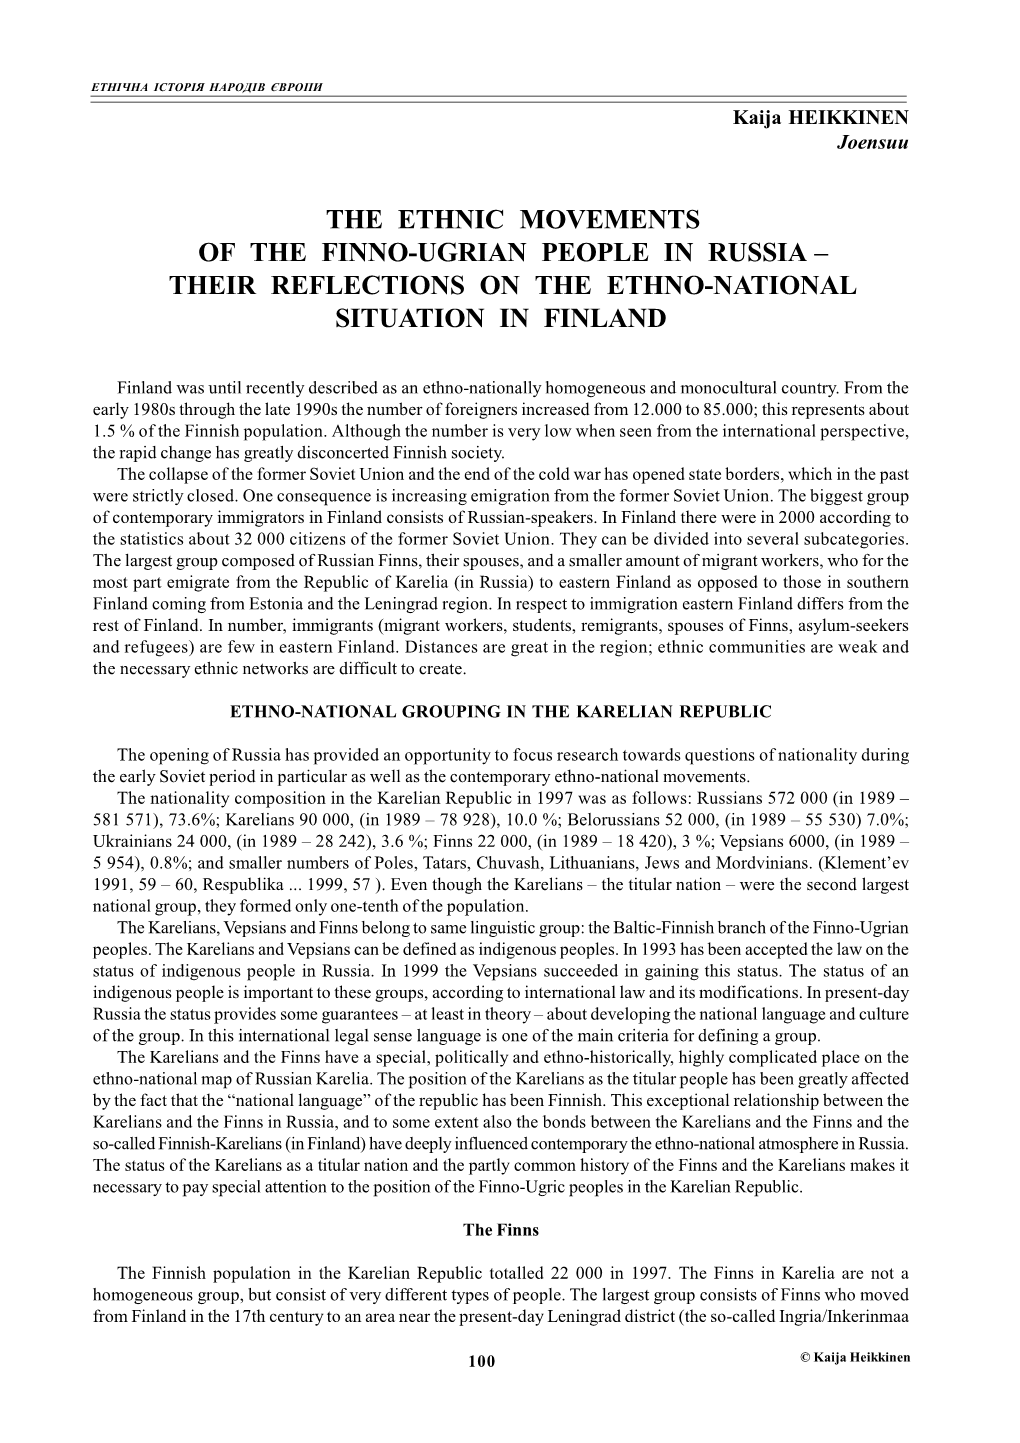 The Ethnic Movements of the Finno-Ugrian People in Russia – Their Reflections on the Ethno-National Situation in Finland